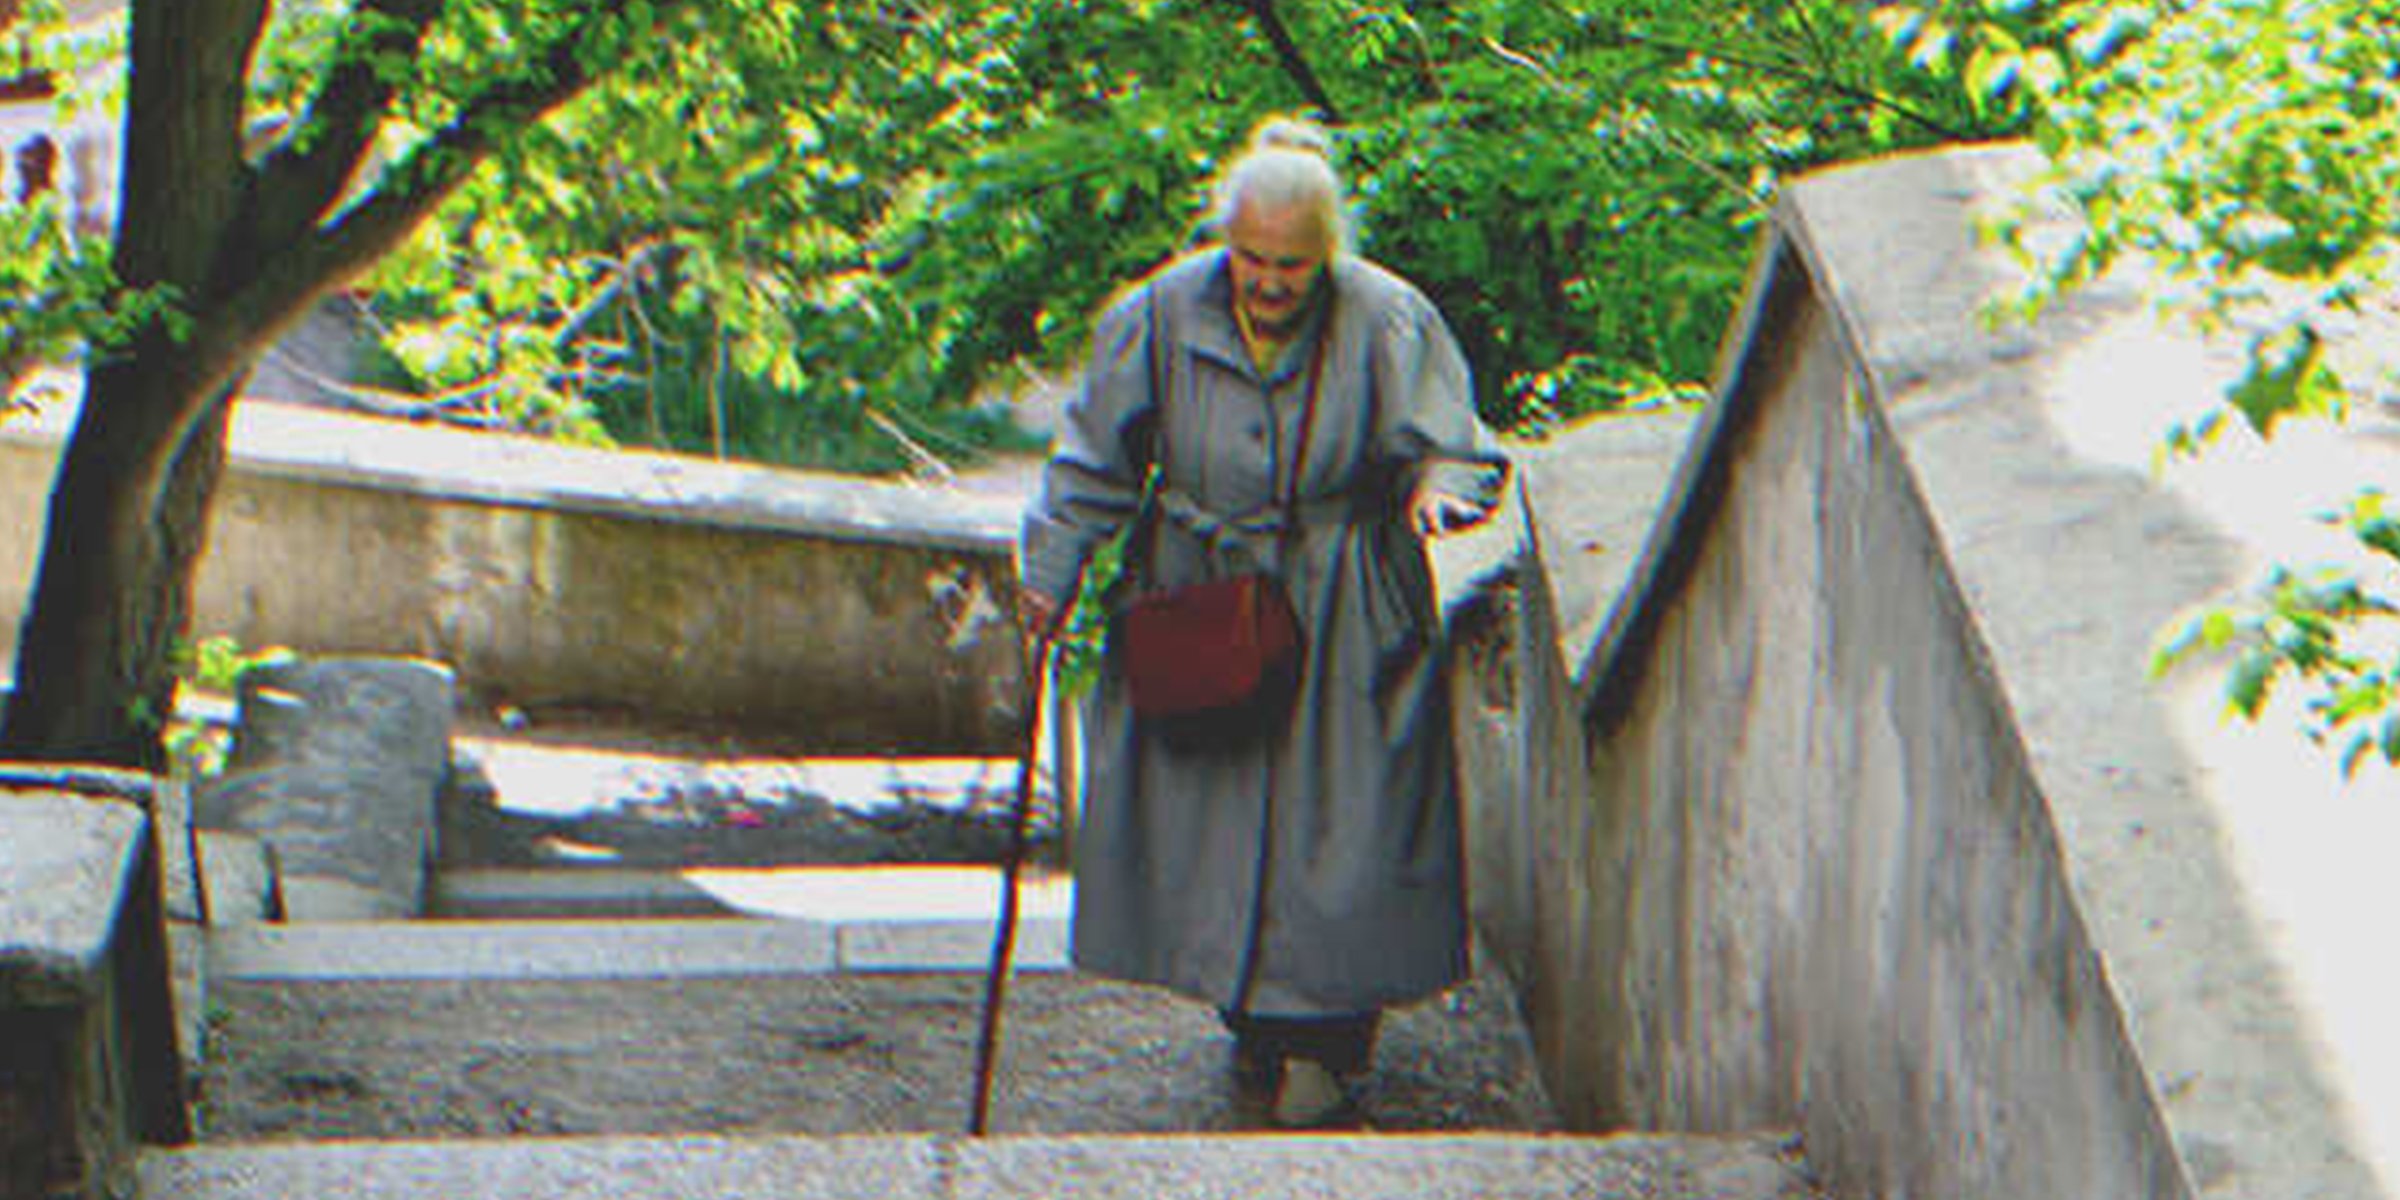 An old lady climbing up a stair | Source: Shutterstock